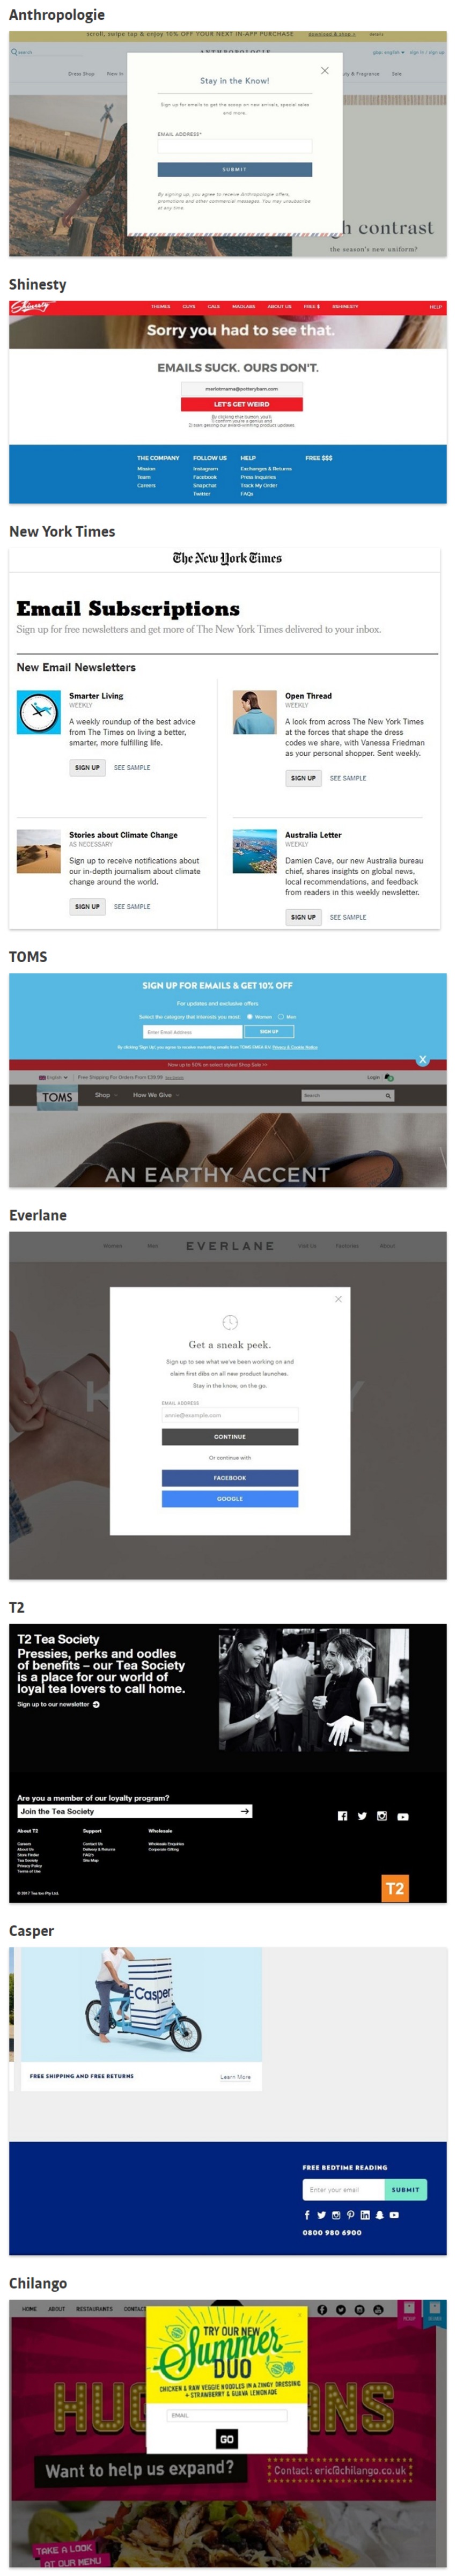 Eight effective examples of email sign up forms - Econsultancy | The MarTech Digest | Scoop.it